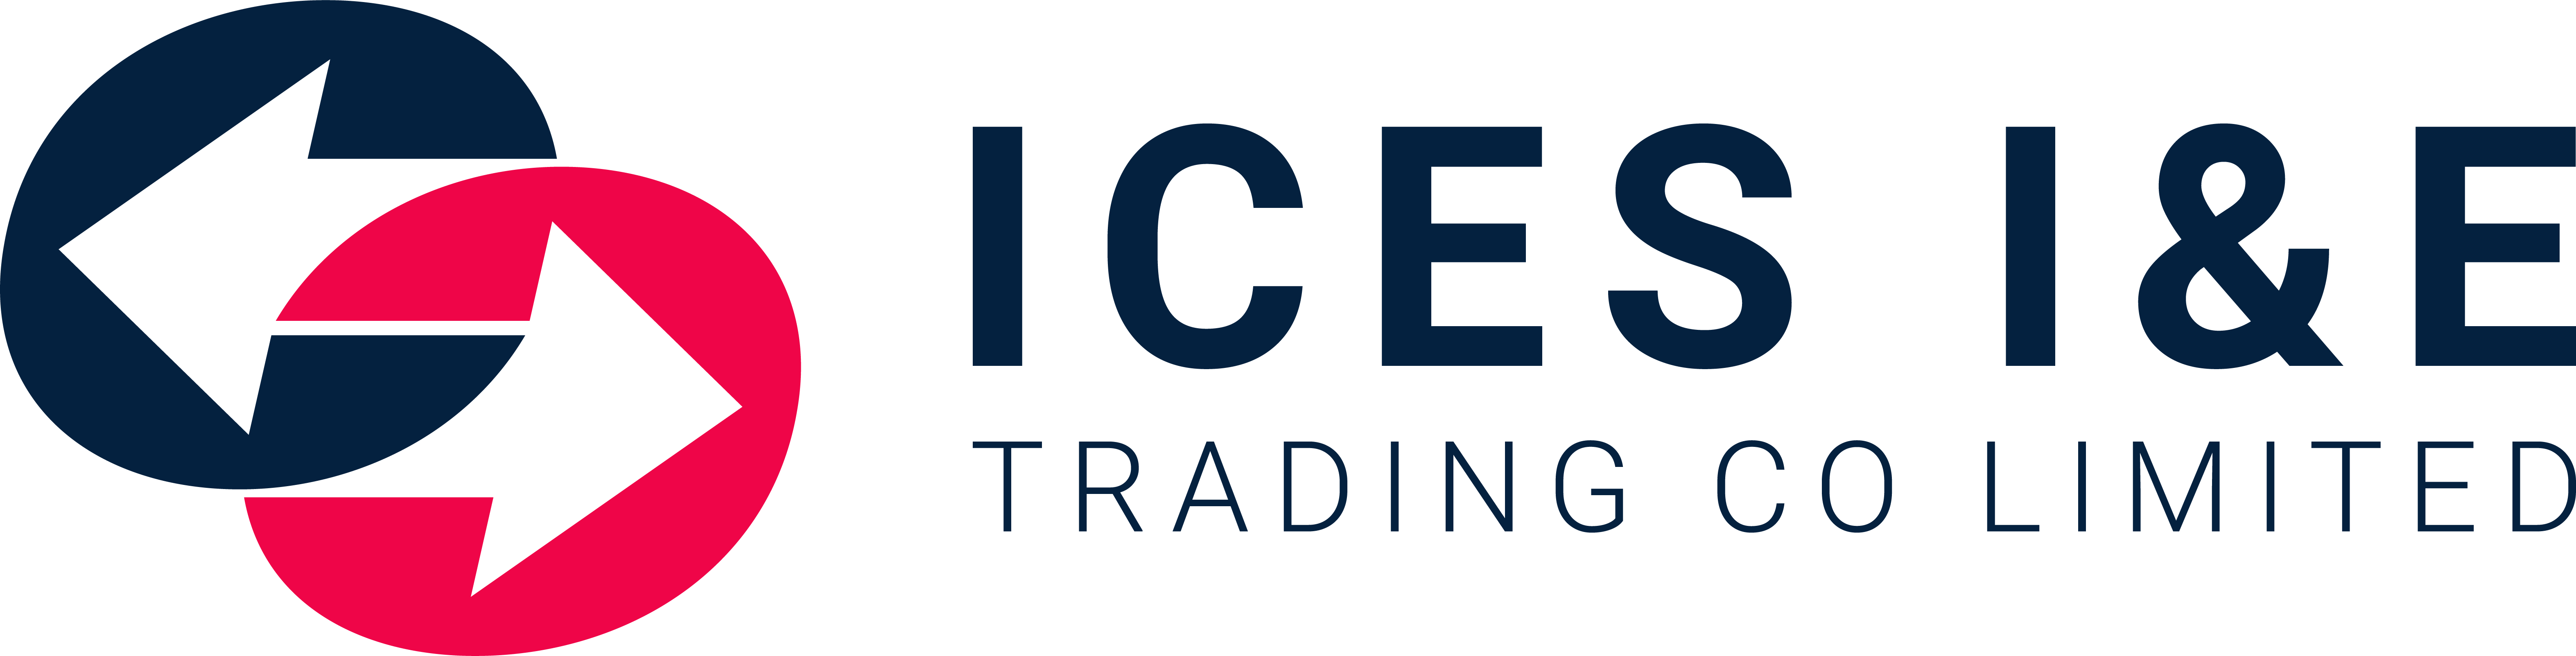 ICES IMPORT & EXPORT TRADING CO LIMITED